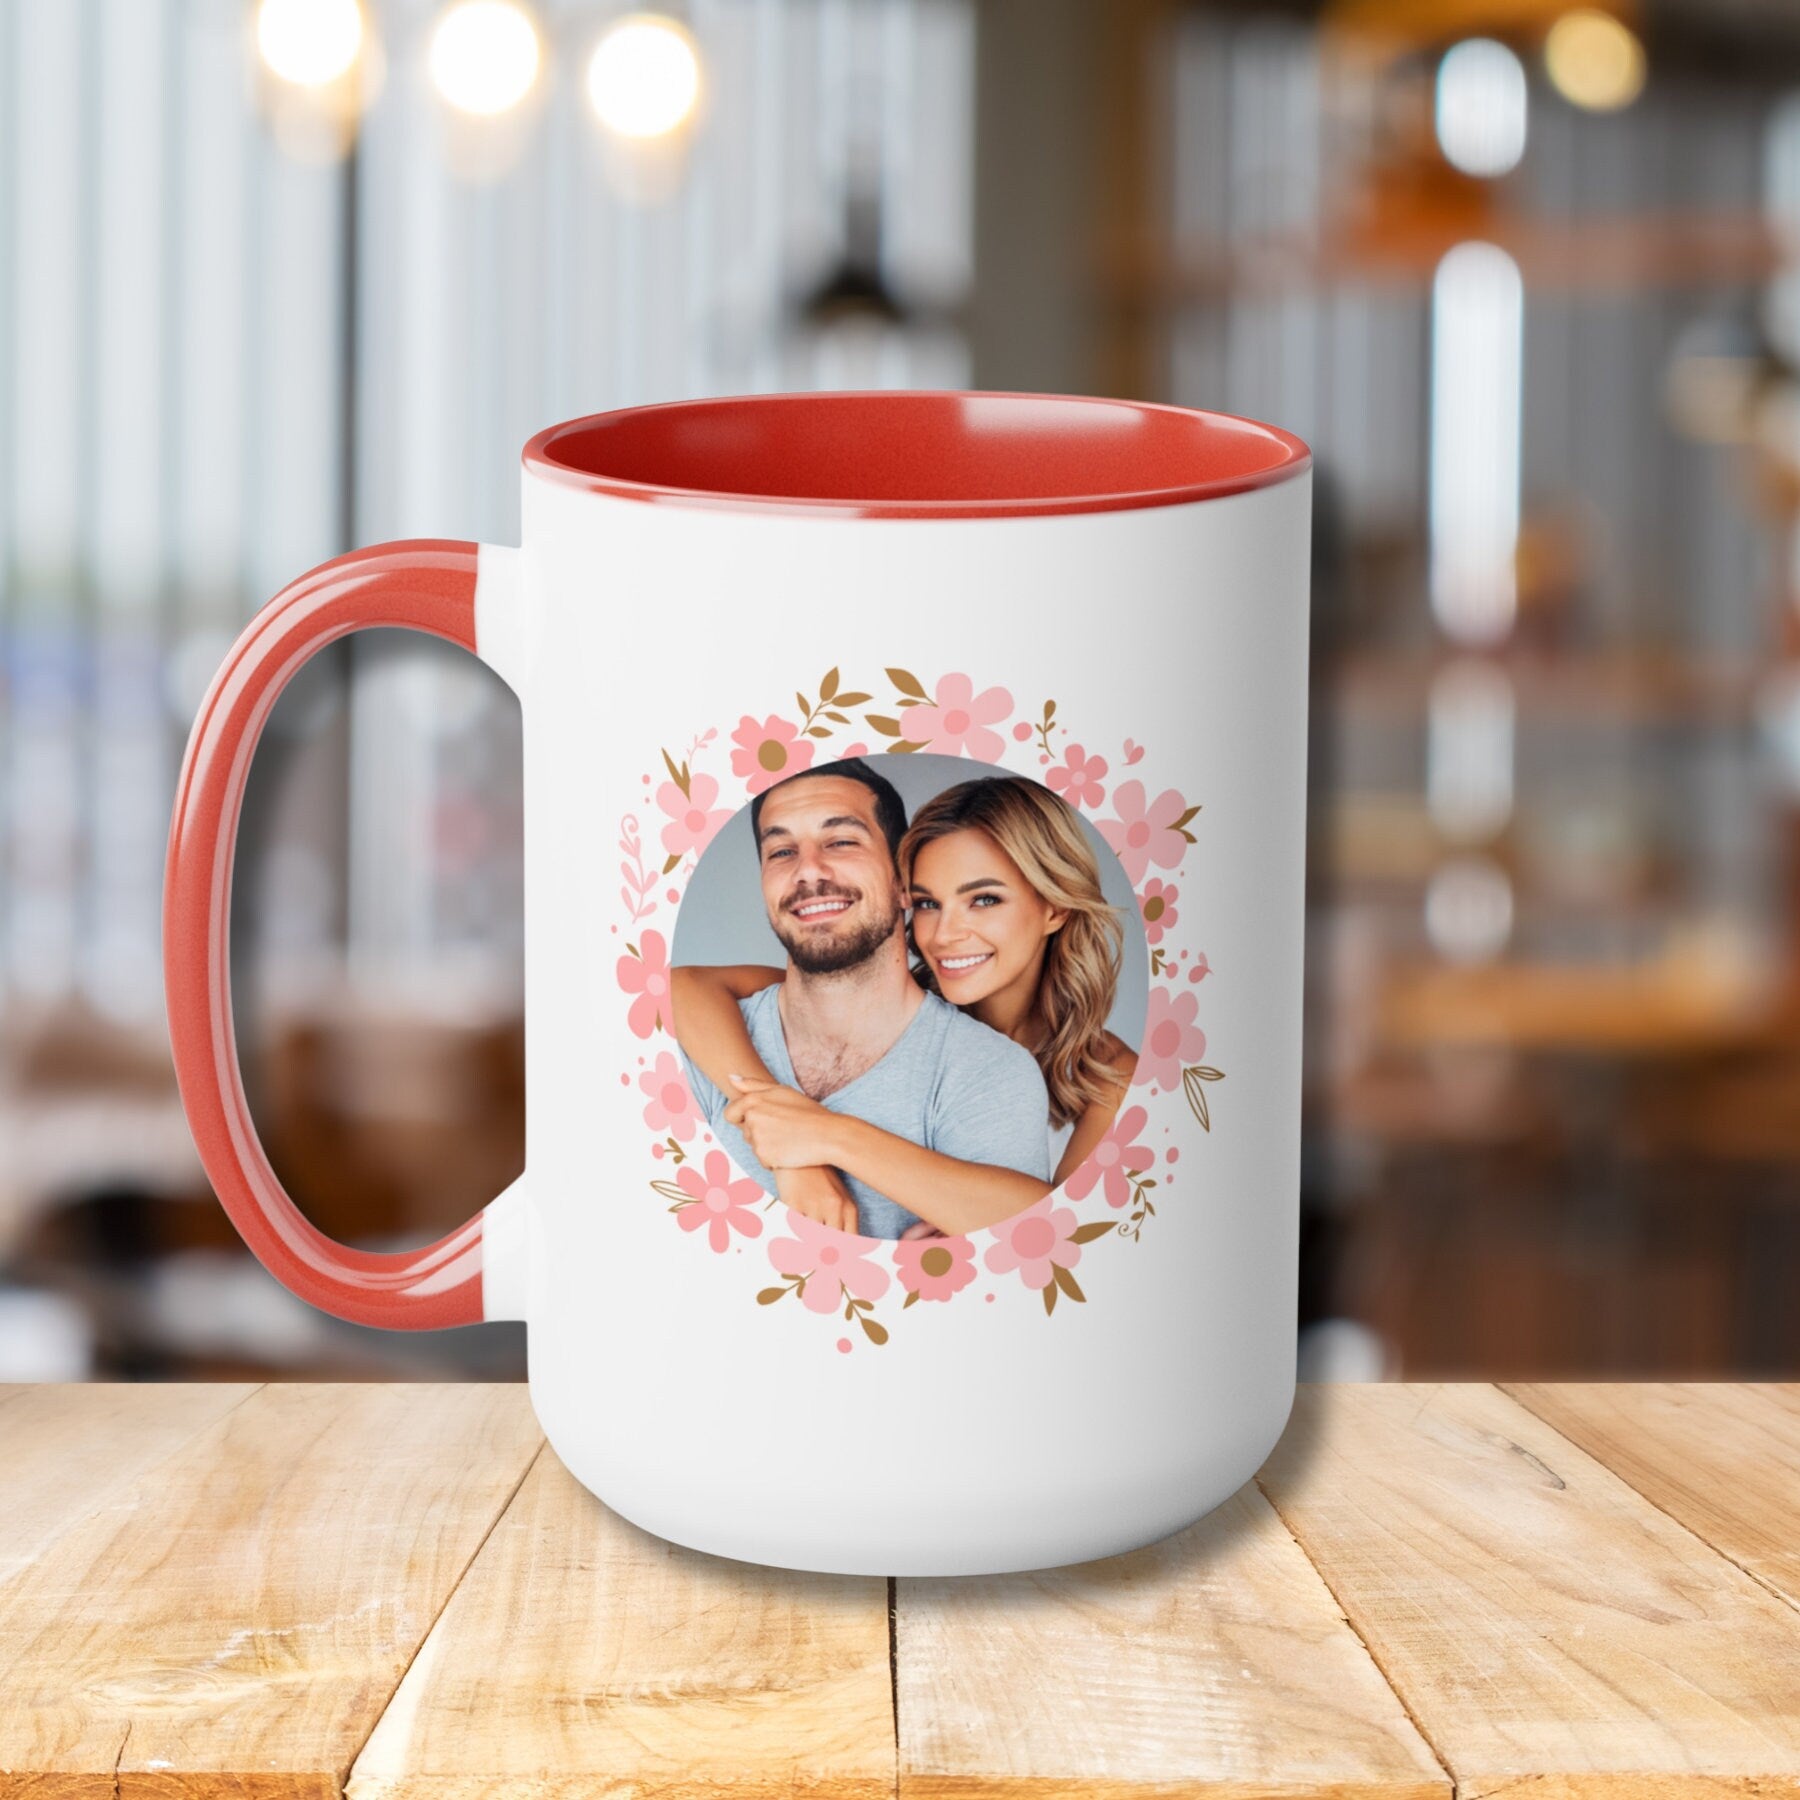 Personalized Custom Photo Coffee Mug with Floral Photo and Text Mom Mama Mum Husband Dad Father Wife Her Him Grandma Family Birthday Gift